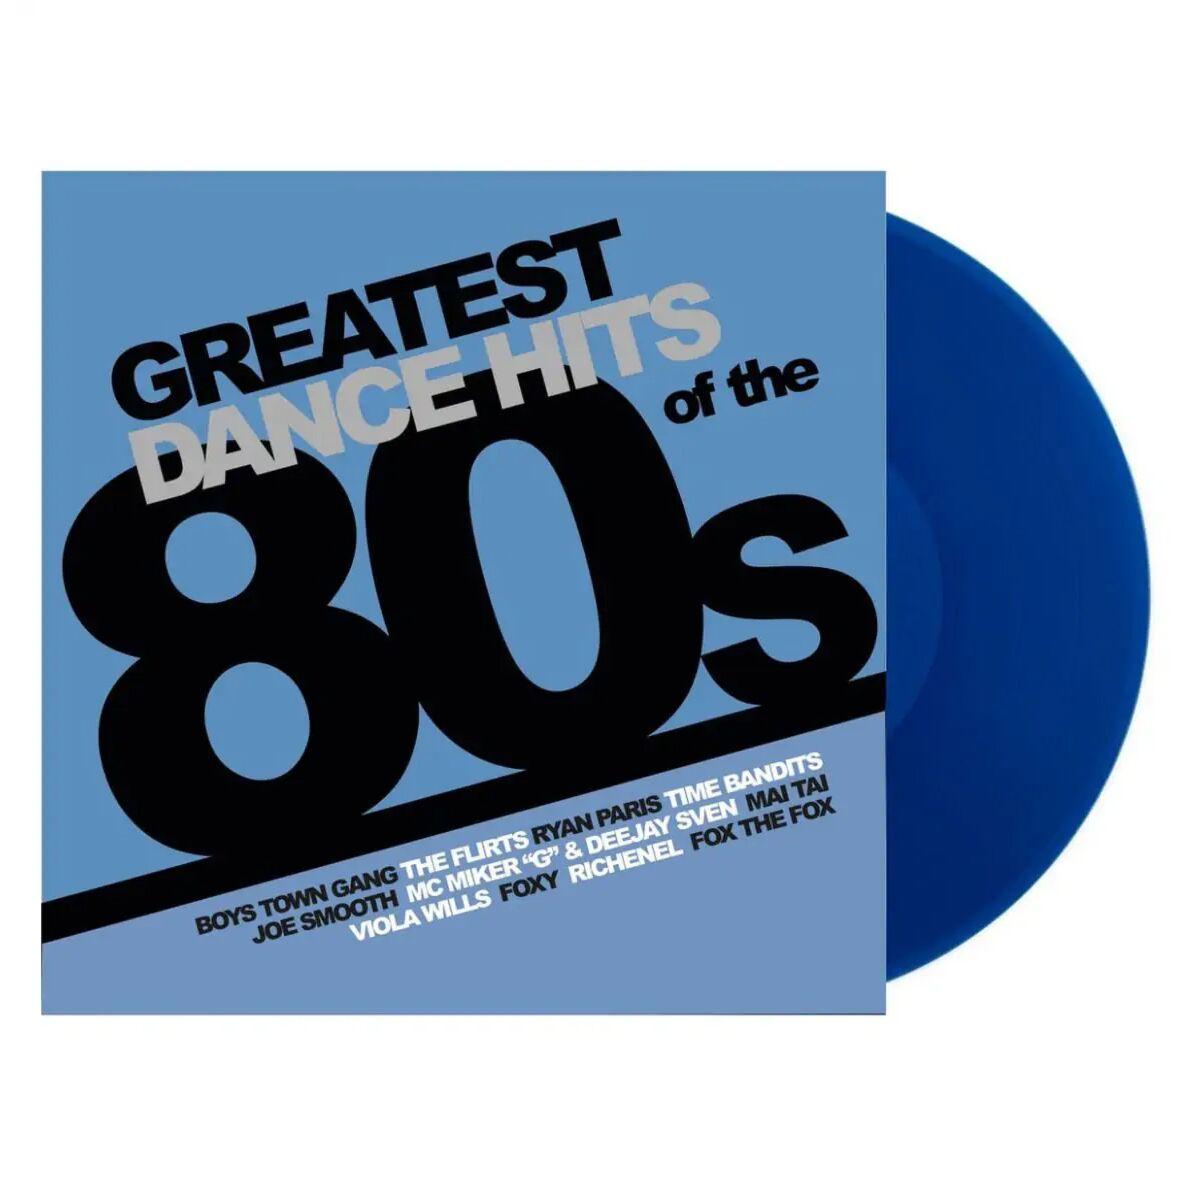 Greatest Dance Hits Of The 80s LP